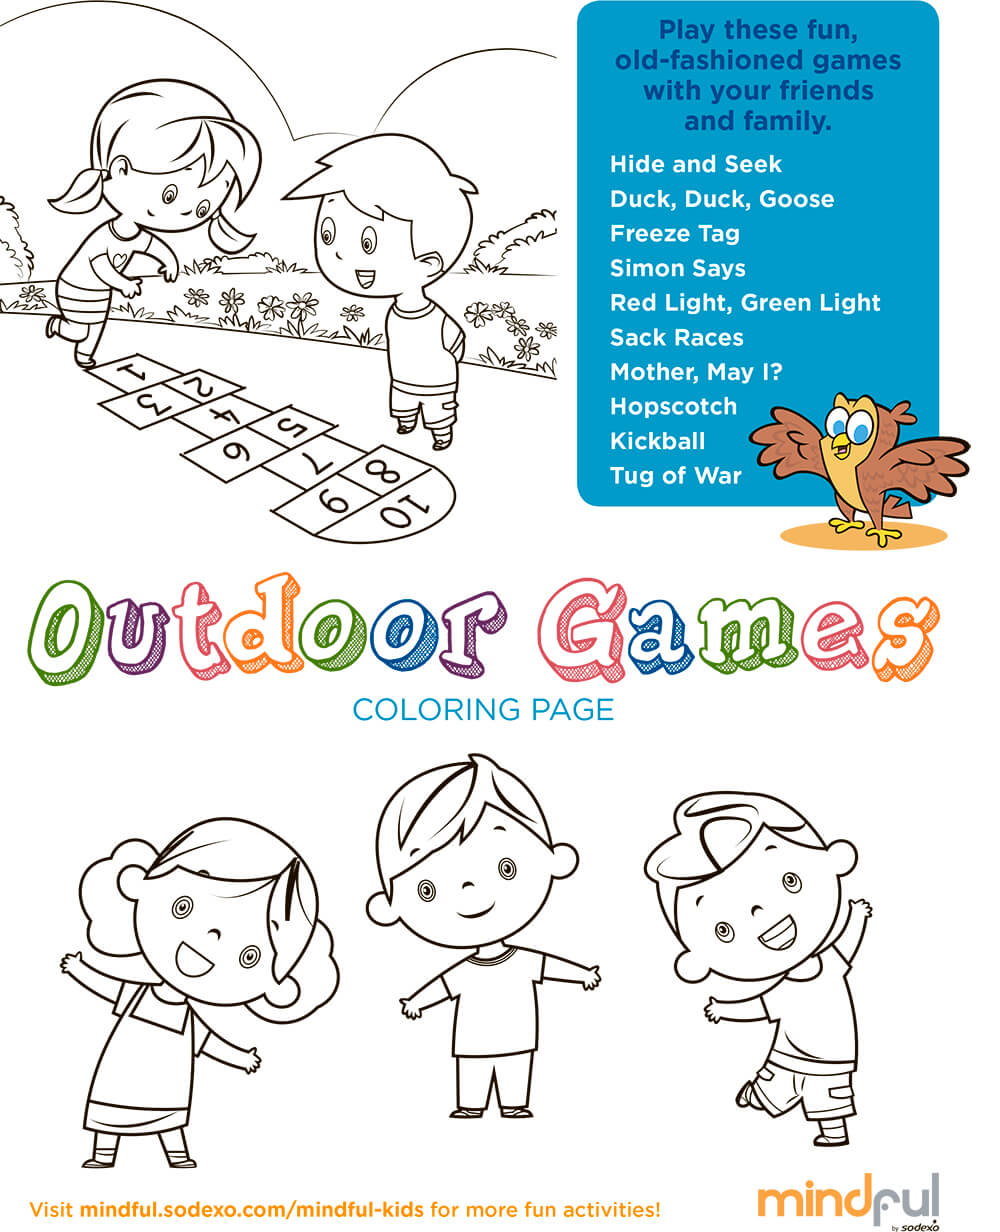 Outdoor Games Coloring Page   Mindful by Sodexo